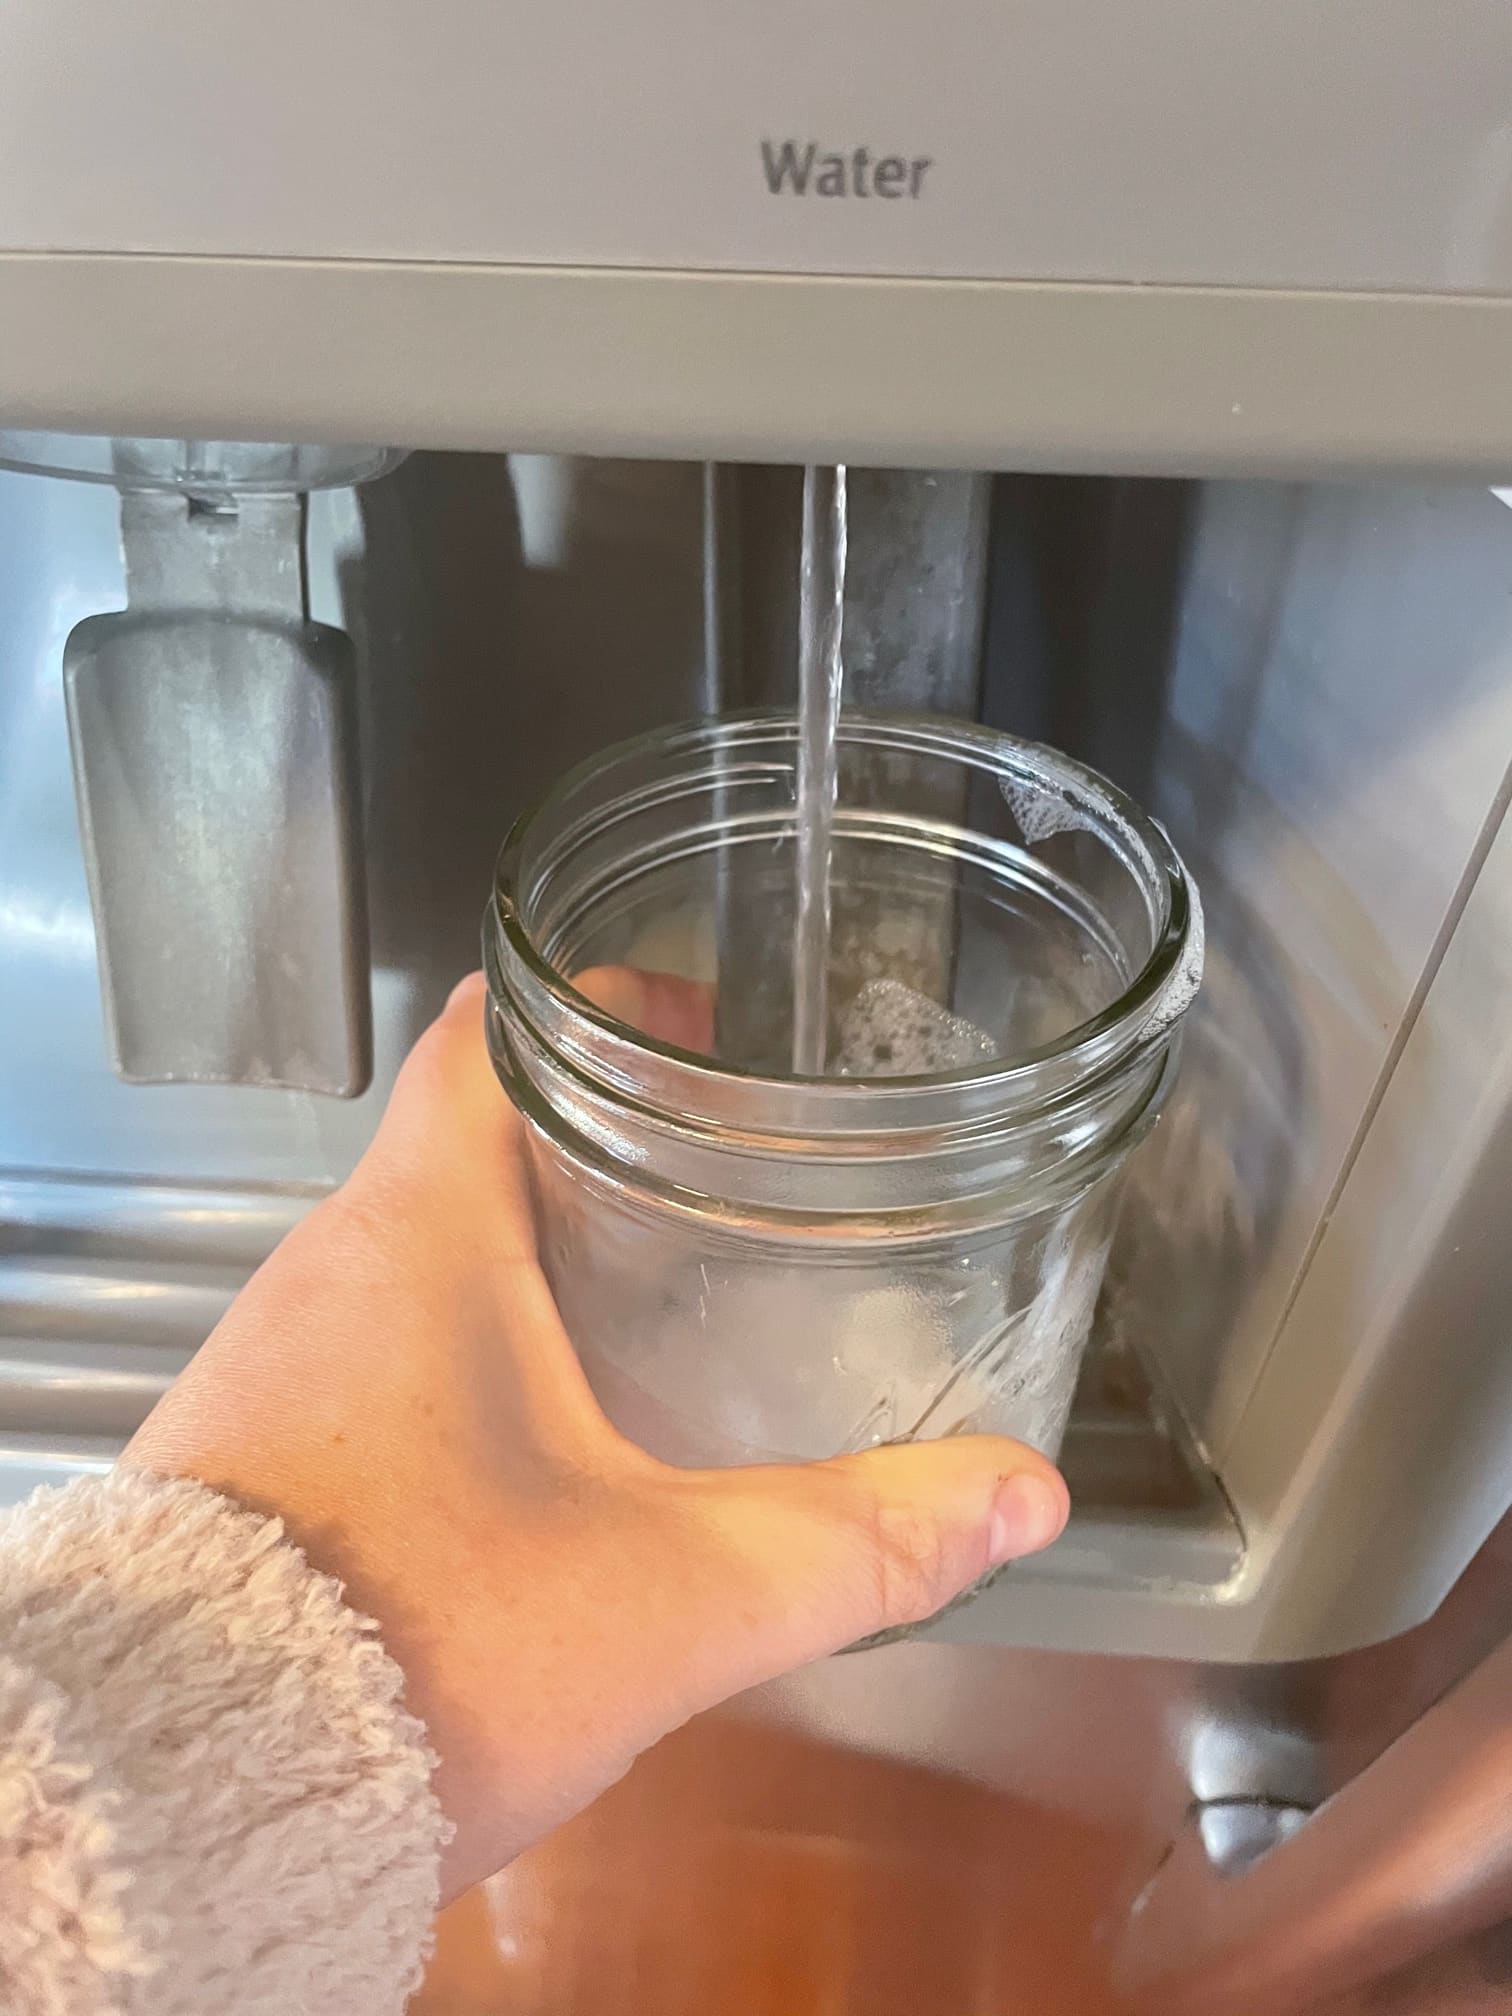 How To Clean Refrigerator Water Dispenser How to Clean Straw - Refrigerator Water Dispenser | Kitchn